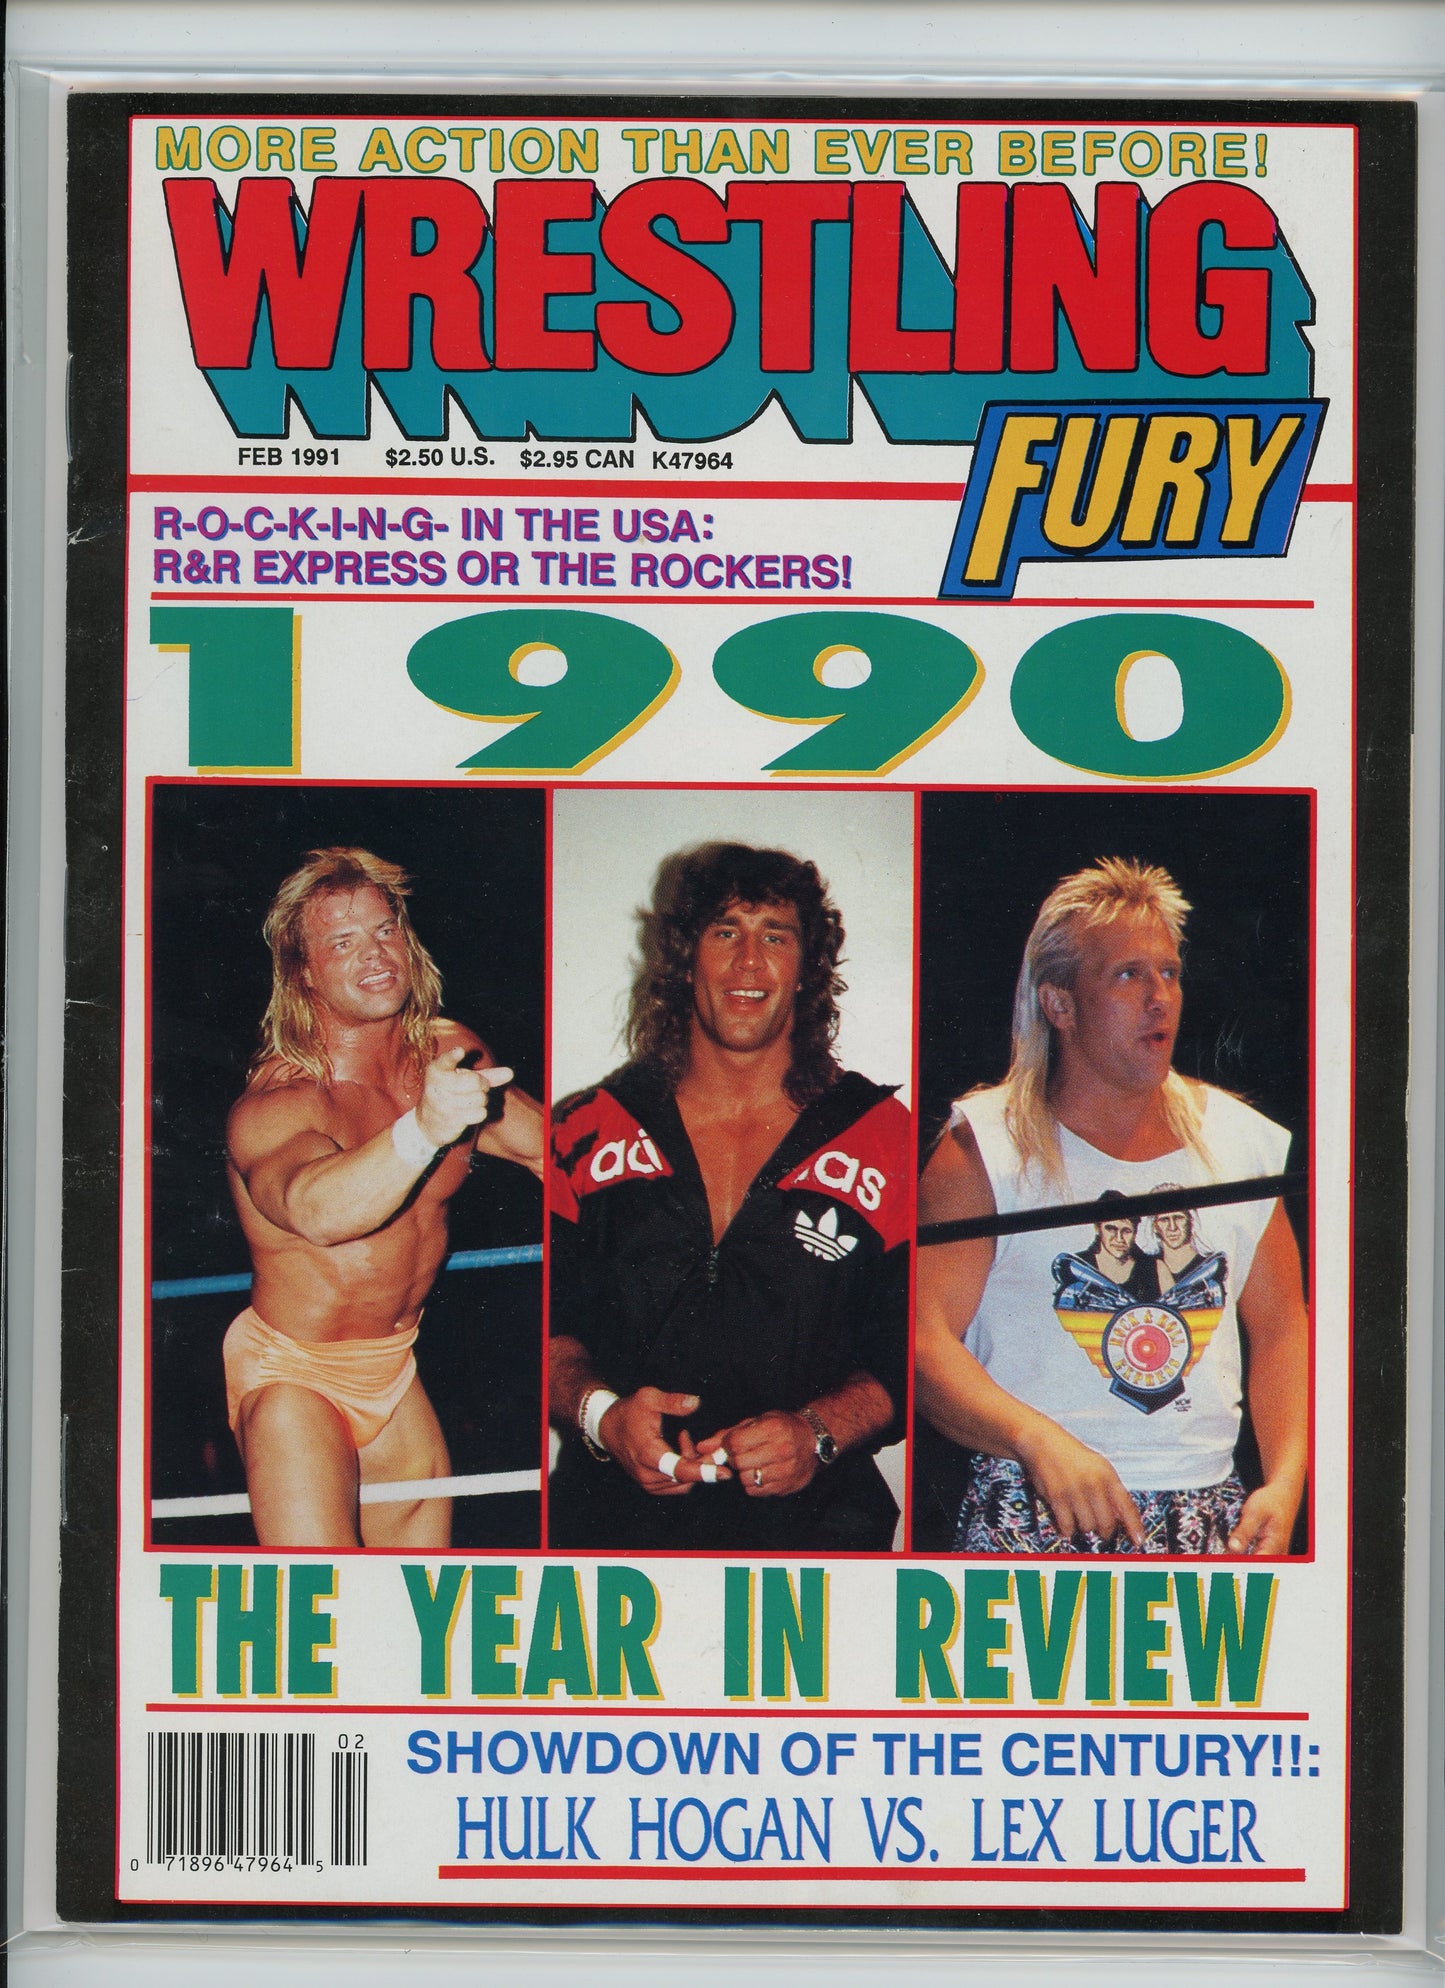 Wrestling Fury Magazine (February 1991) The Year in Review